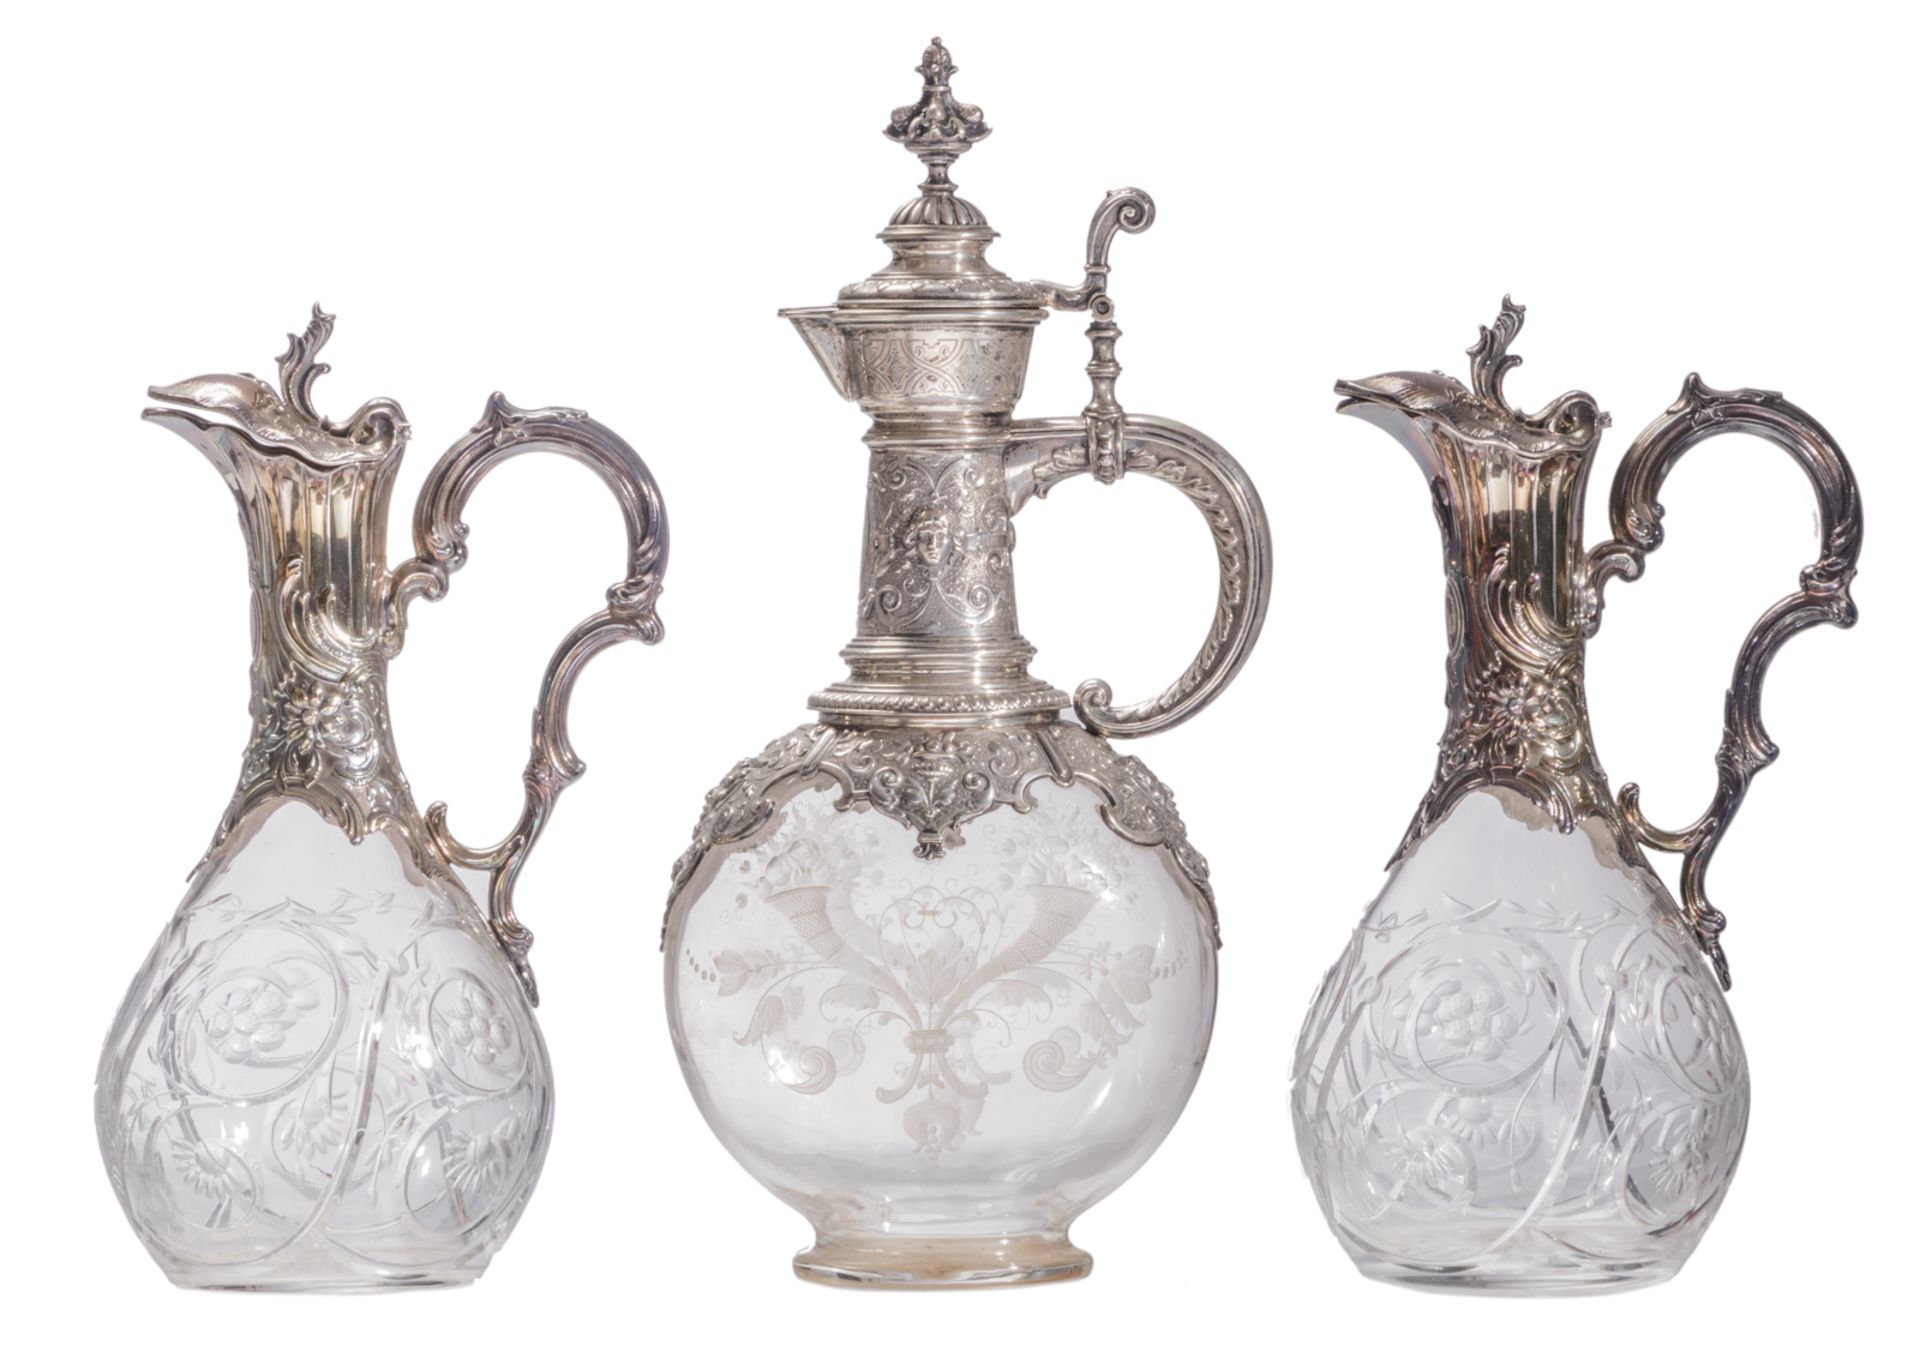 Two cut crystal liqueur decanters with Rococo revival silver mount, French export silver; added a